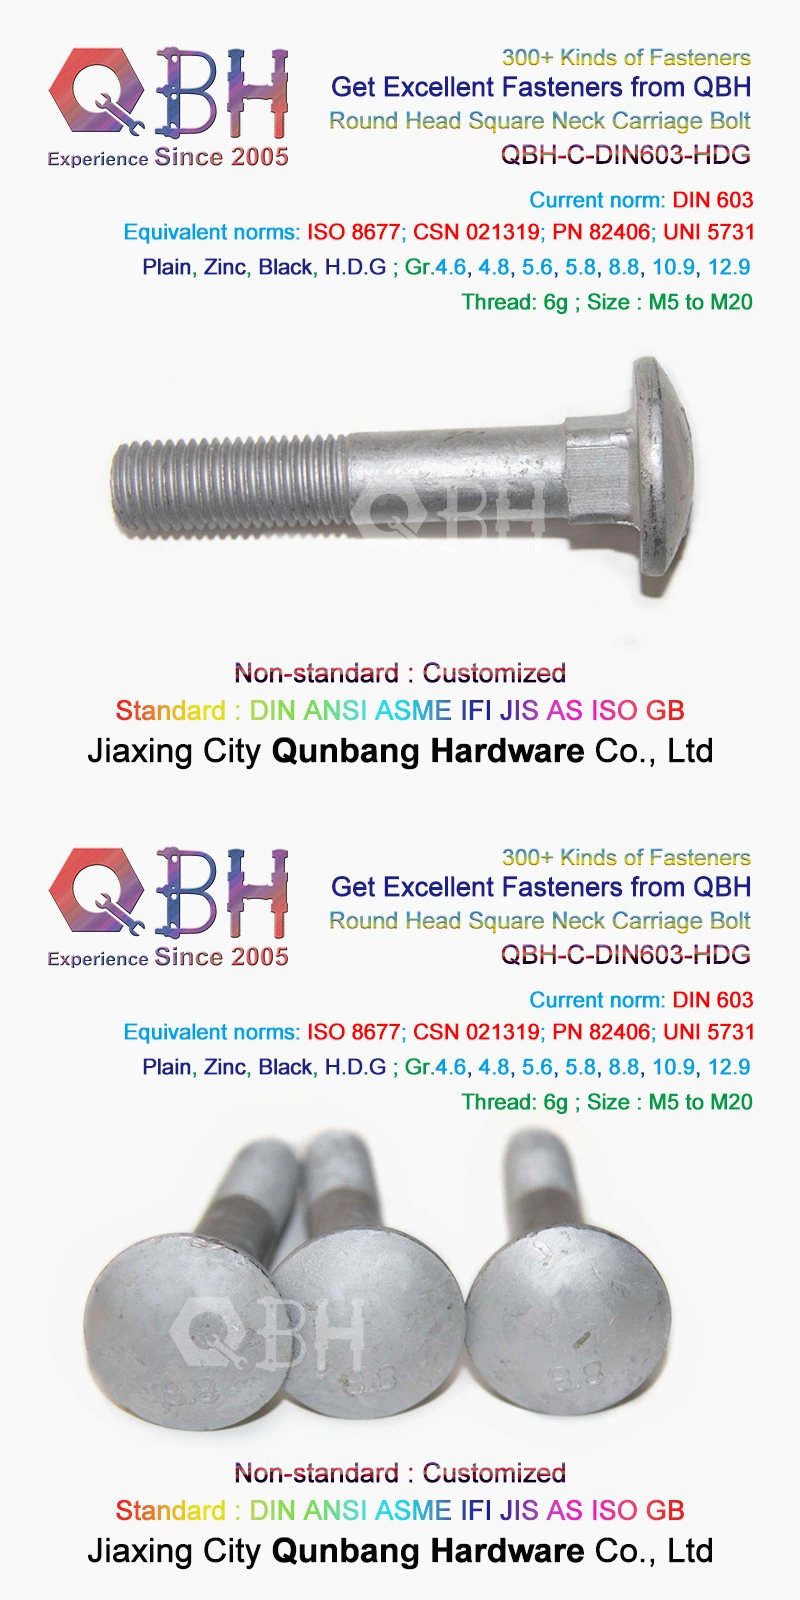 Qbh DIN603 Carriage Bolts (M5-M20 Cl. 4.8/6.8)